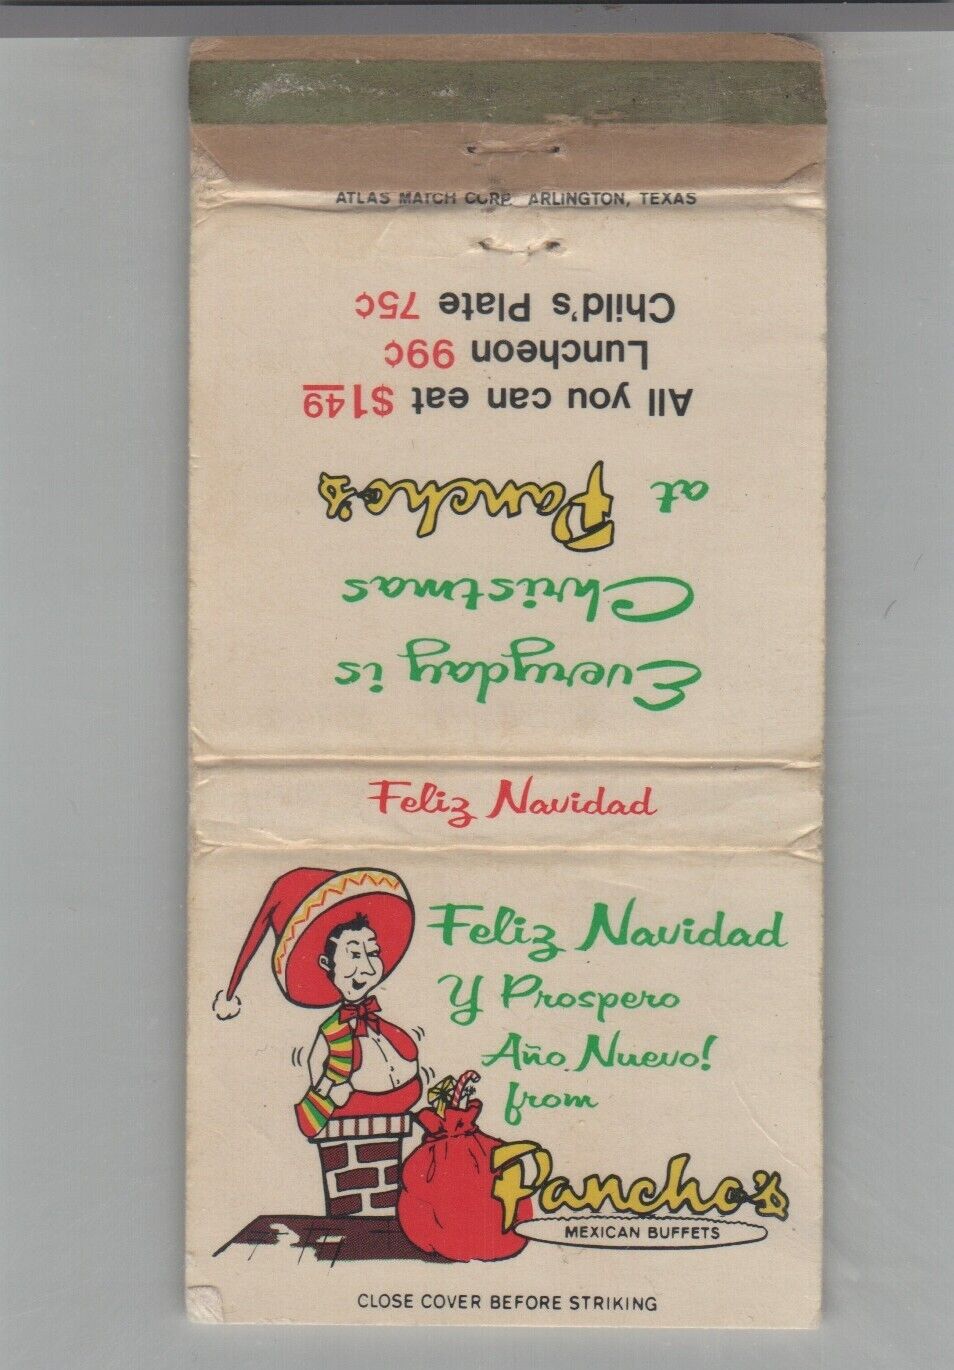 Matchbook Cover Pancho's Mexican Buffets